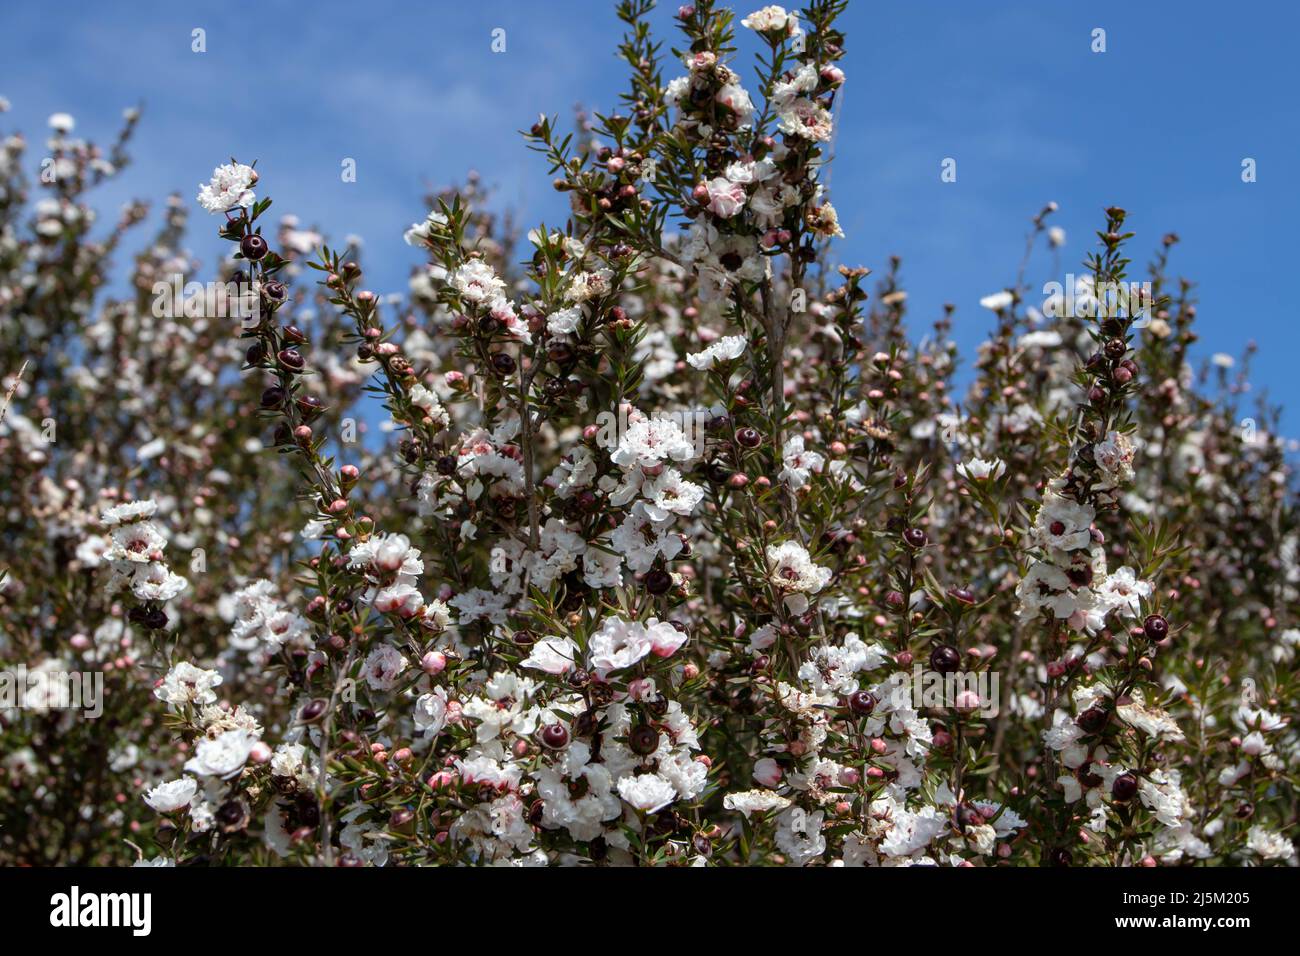 Tea tree or manuka or leptospermum scoparium plant branches with flowers and buds on the clear blue sky Stock Photo